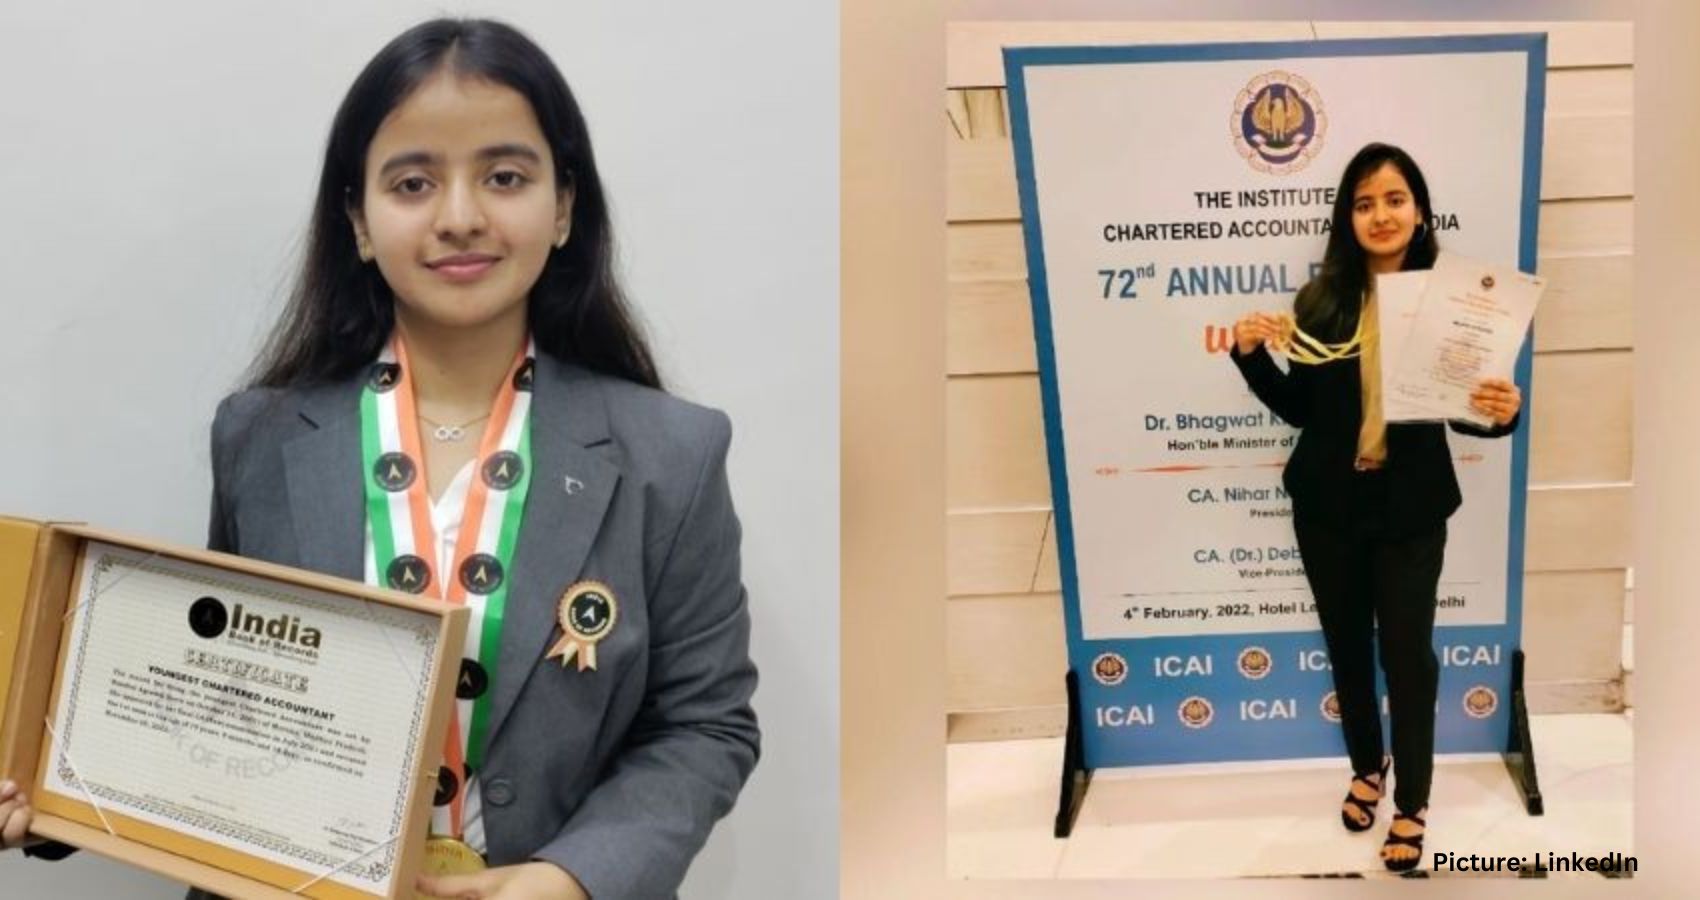 19-Year-Old Nandini Agrawal Becomes World’s Youngest Female Chartered Accountant, Sets Guinness World Record